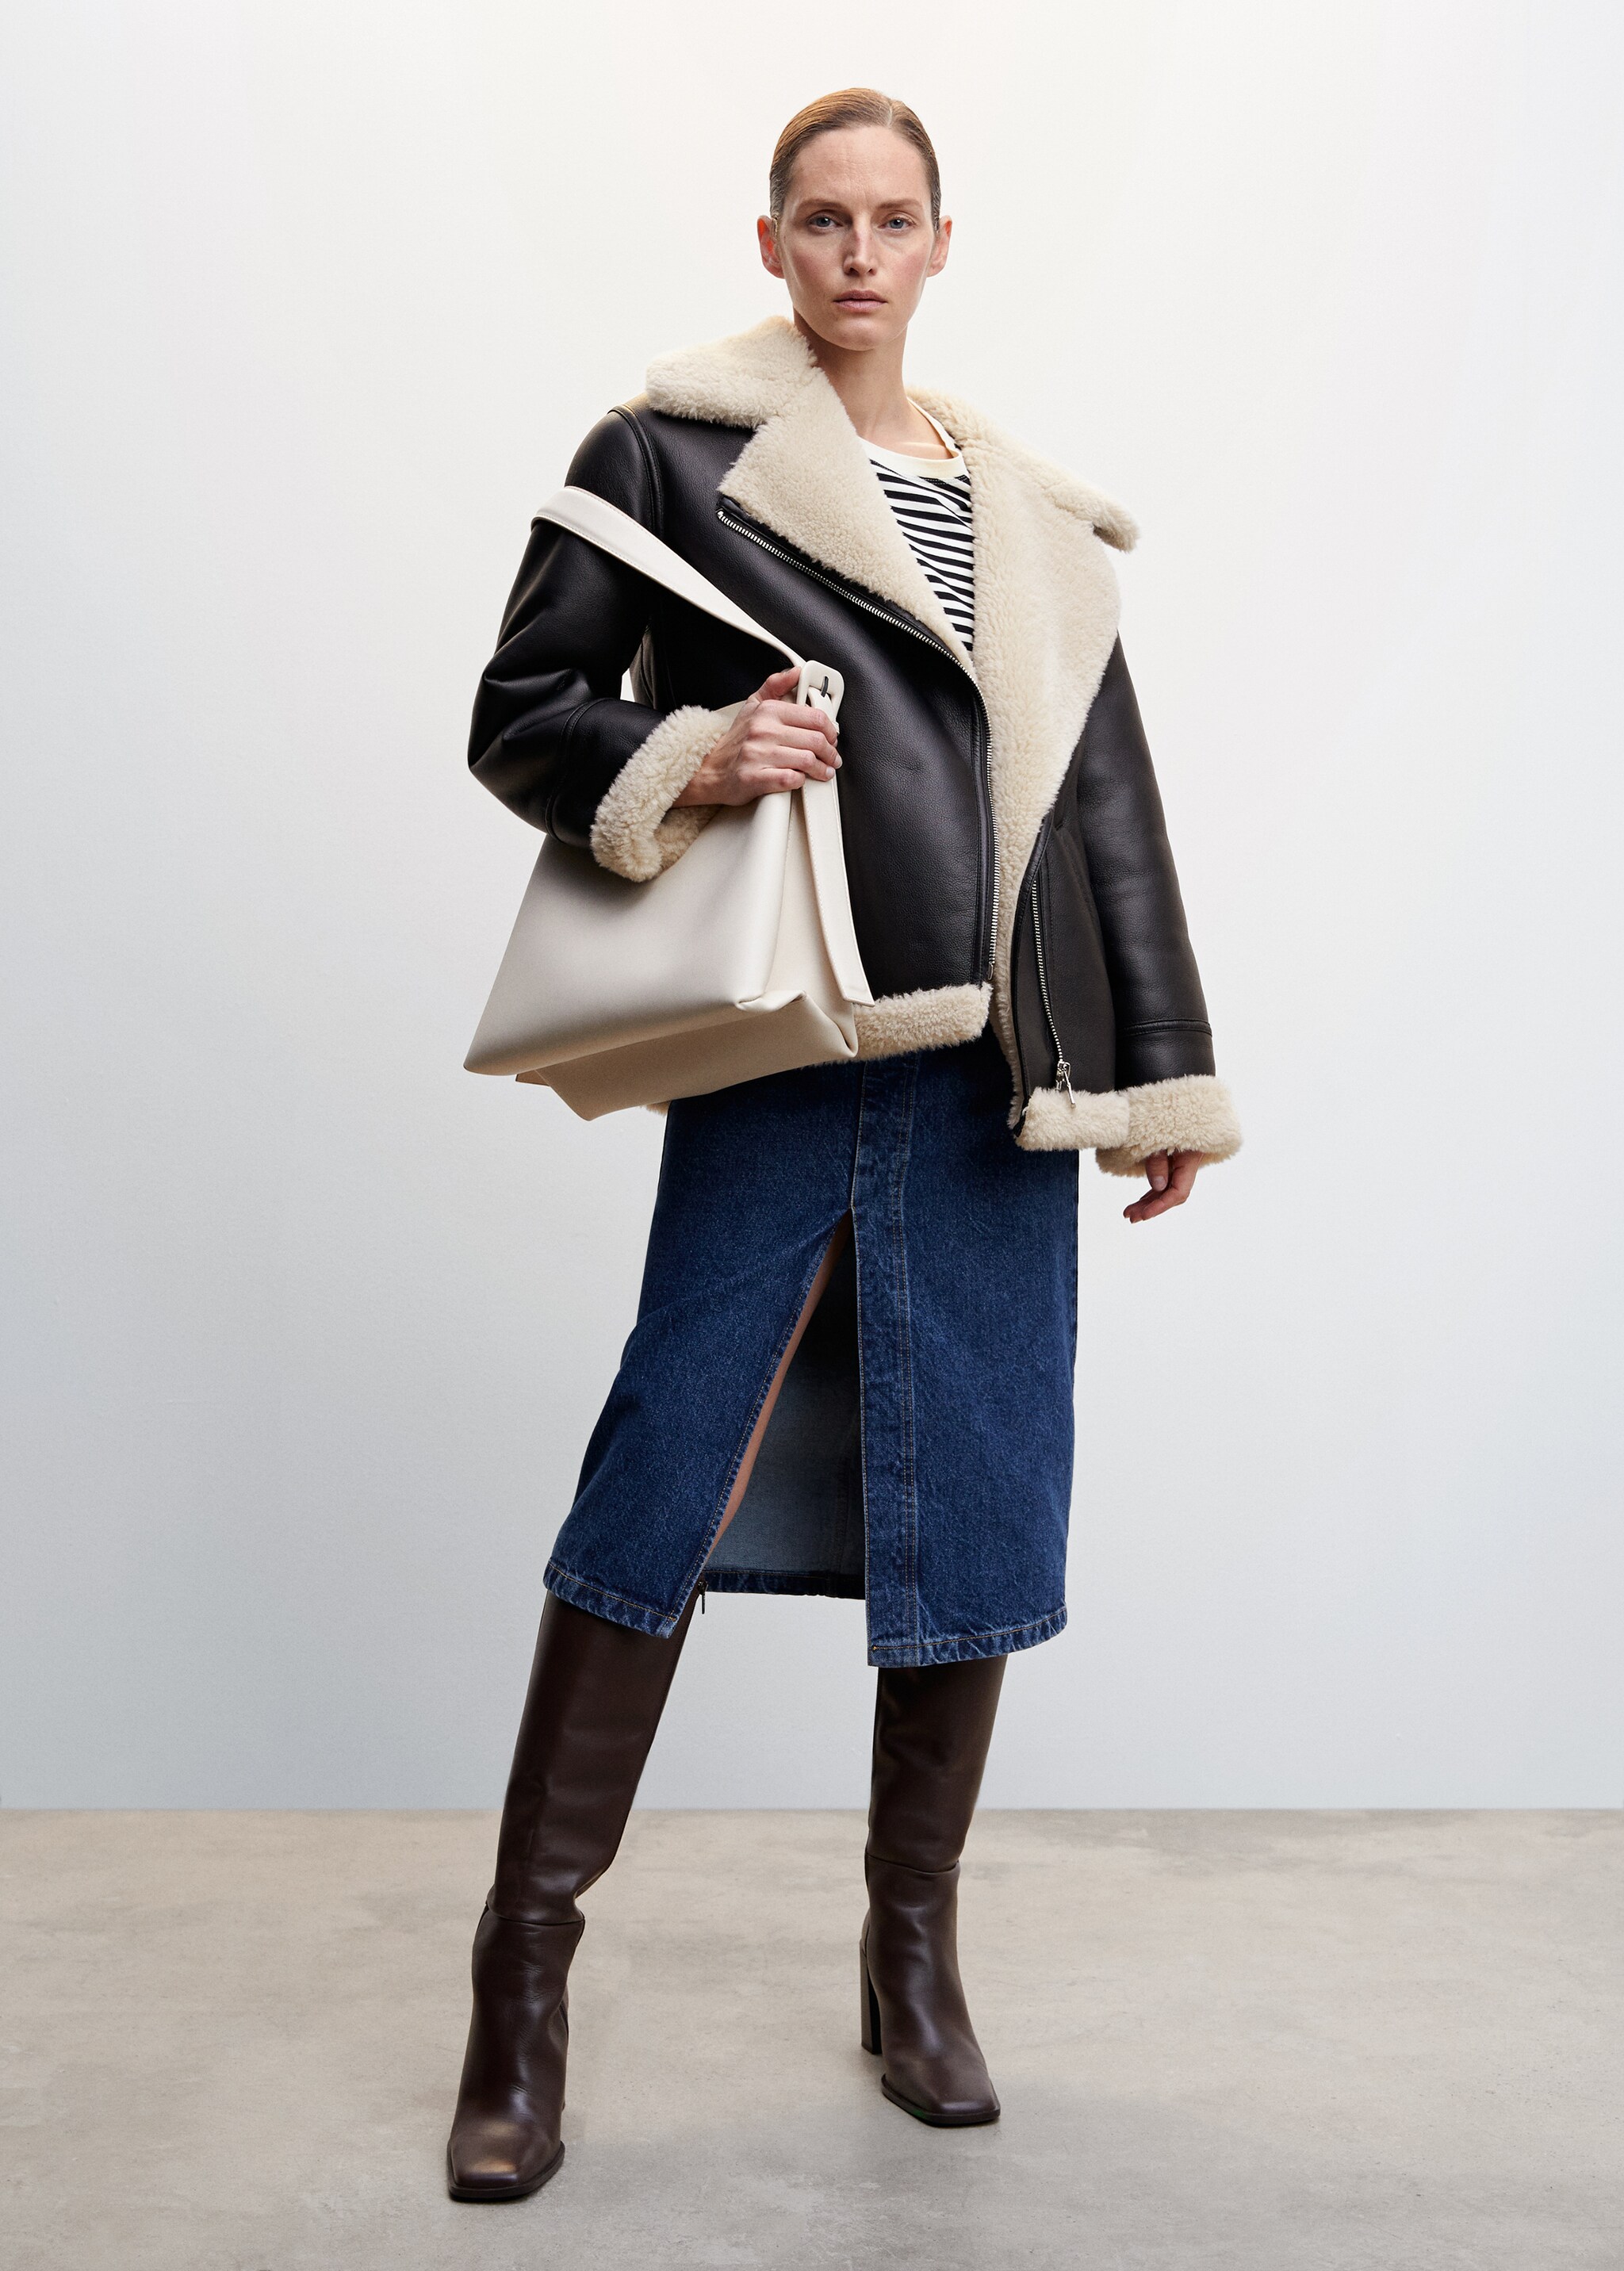 Faux shearling-lined jacket - General plane